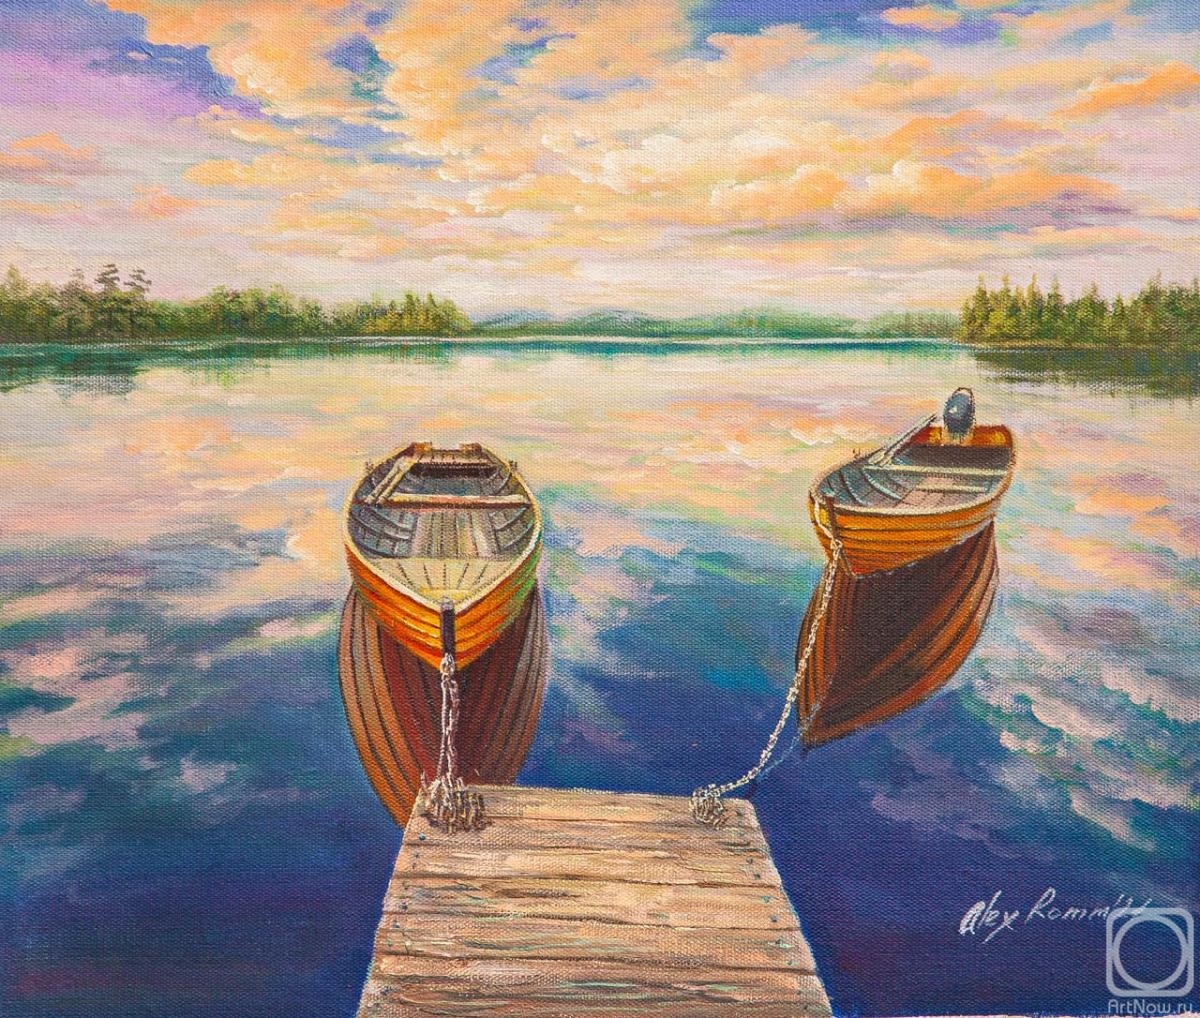 Romm Alexandr. Boats on the mirror surface of the lake